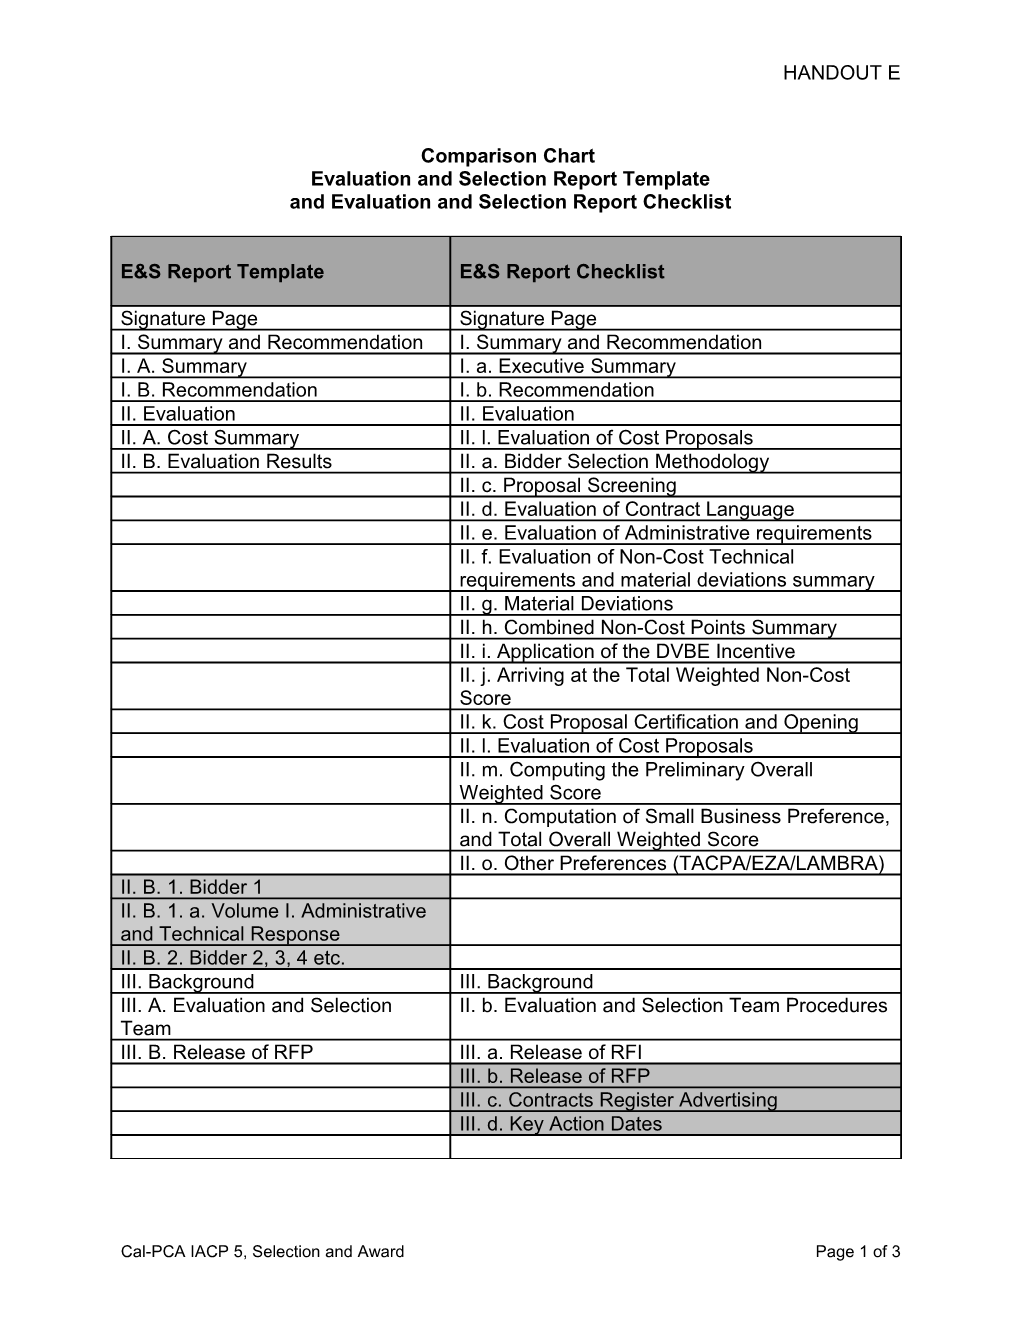 Evaluation and Selection Report Template